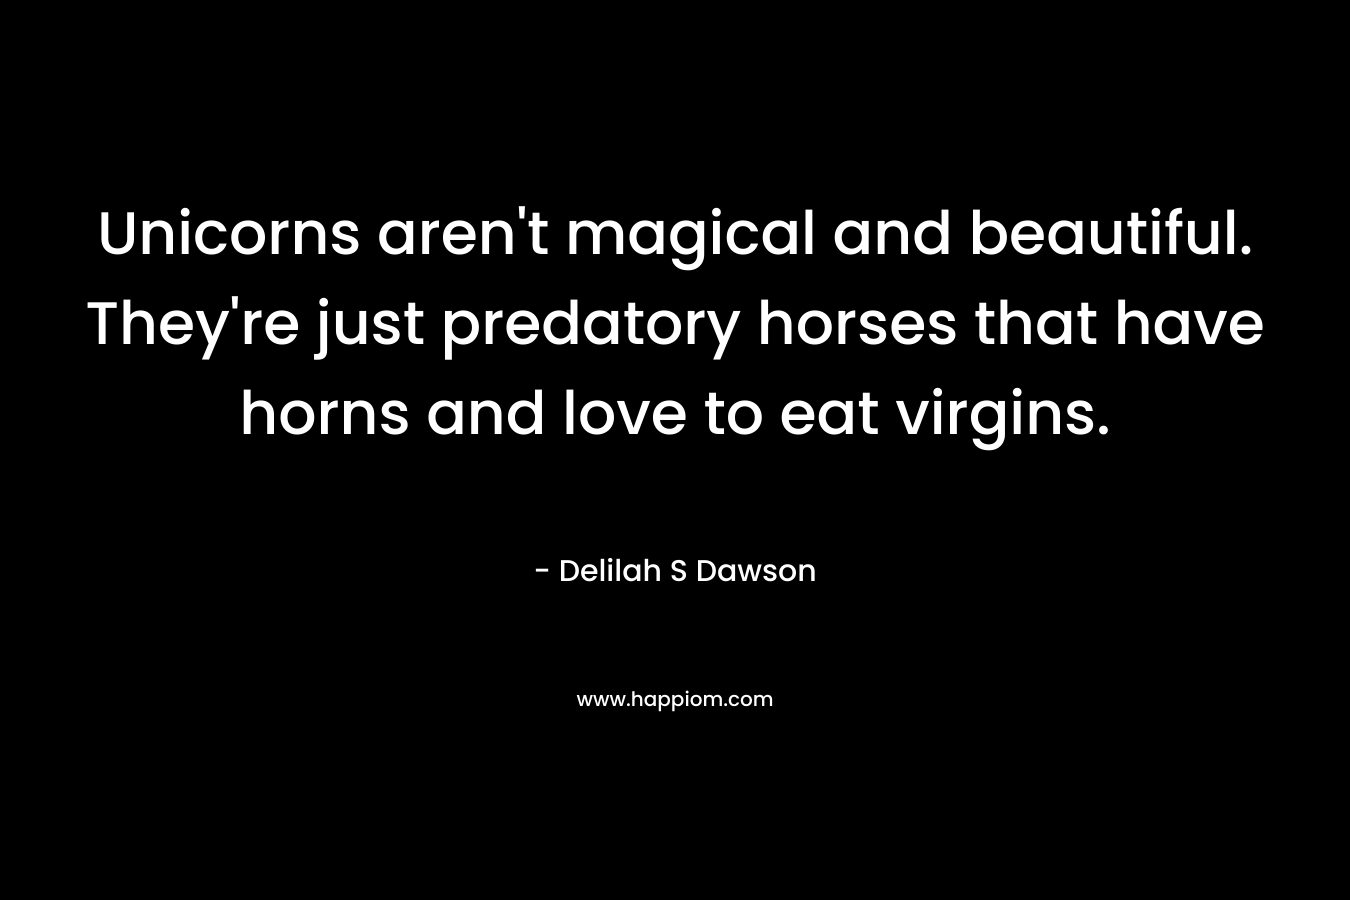 Unicorns aren’t magical and beautiful. They’re just predatory horses that have horns and love to eat virgins. – Delilah S Dawson